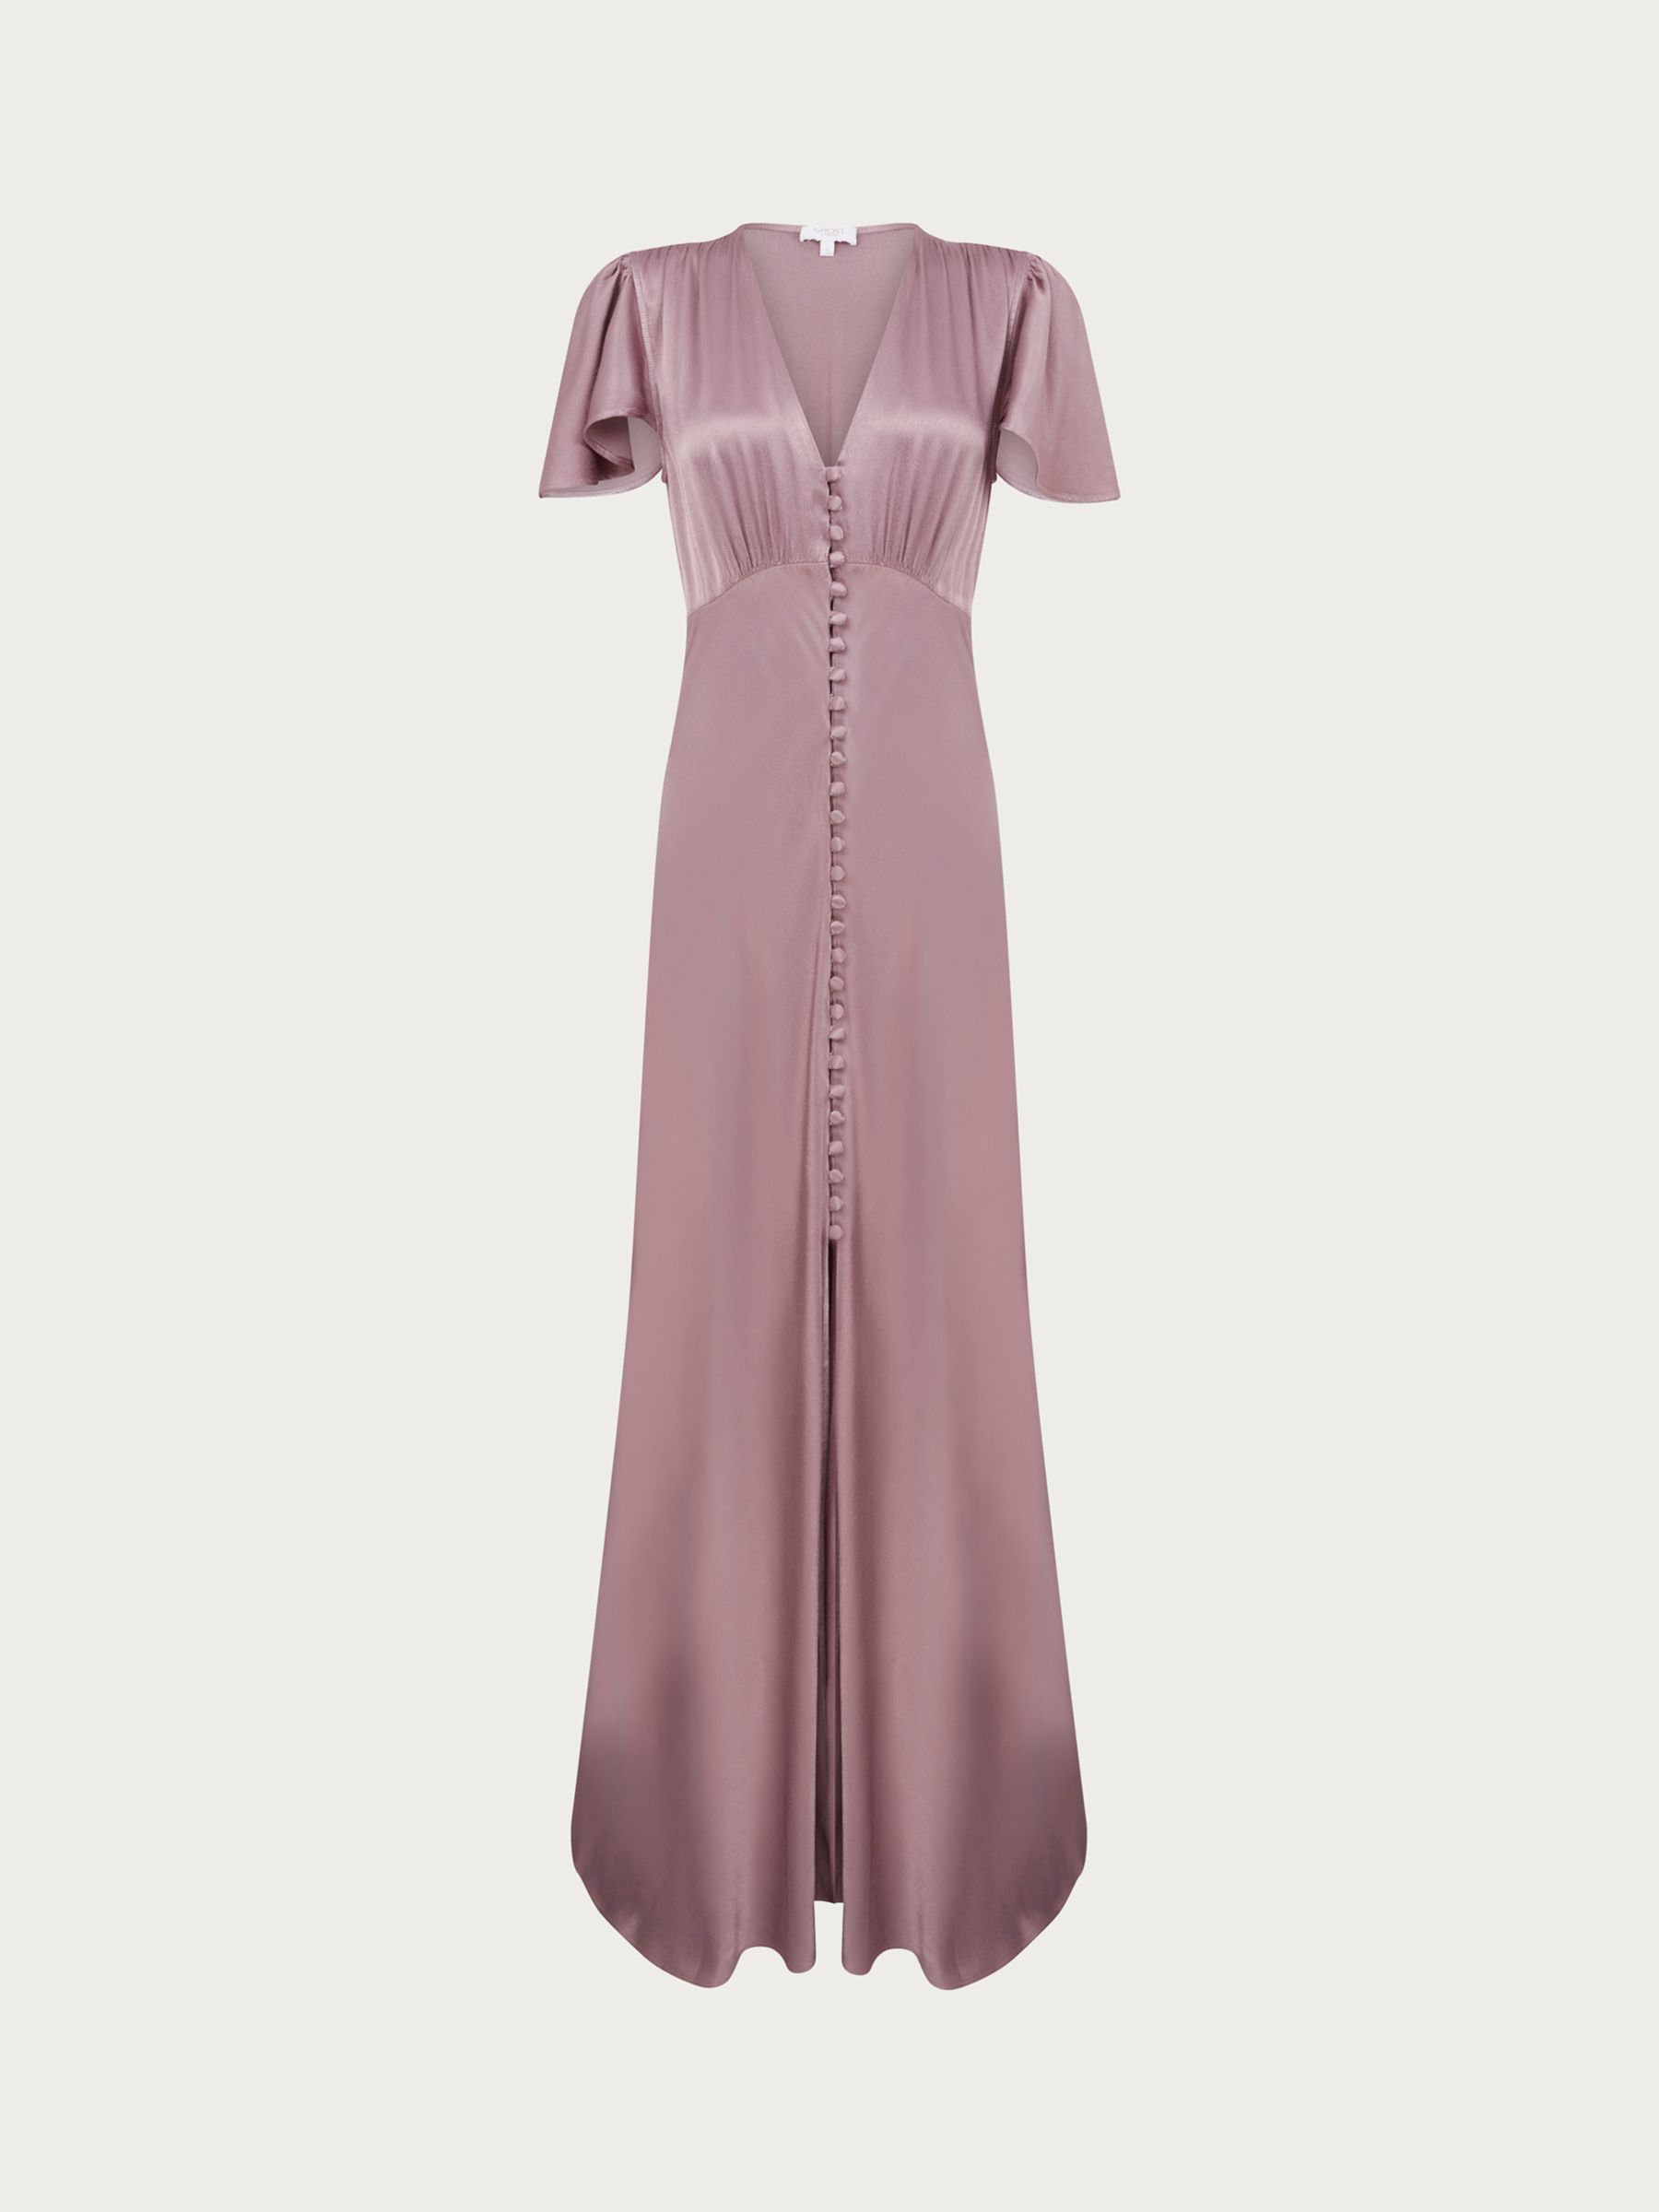 Ghost Delphine Satin Maxi Dress, Dusted Heather at John Lewis & Partners